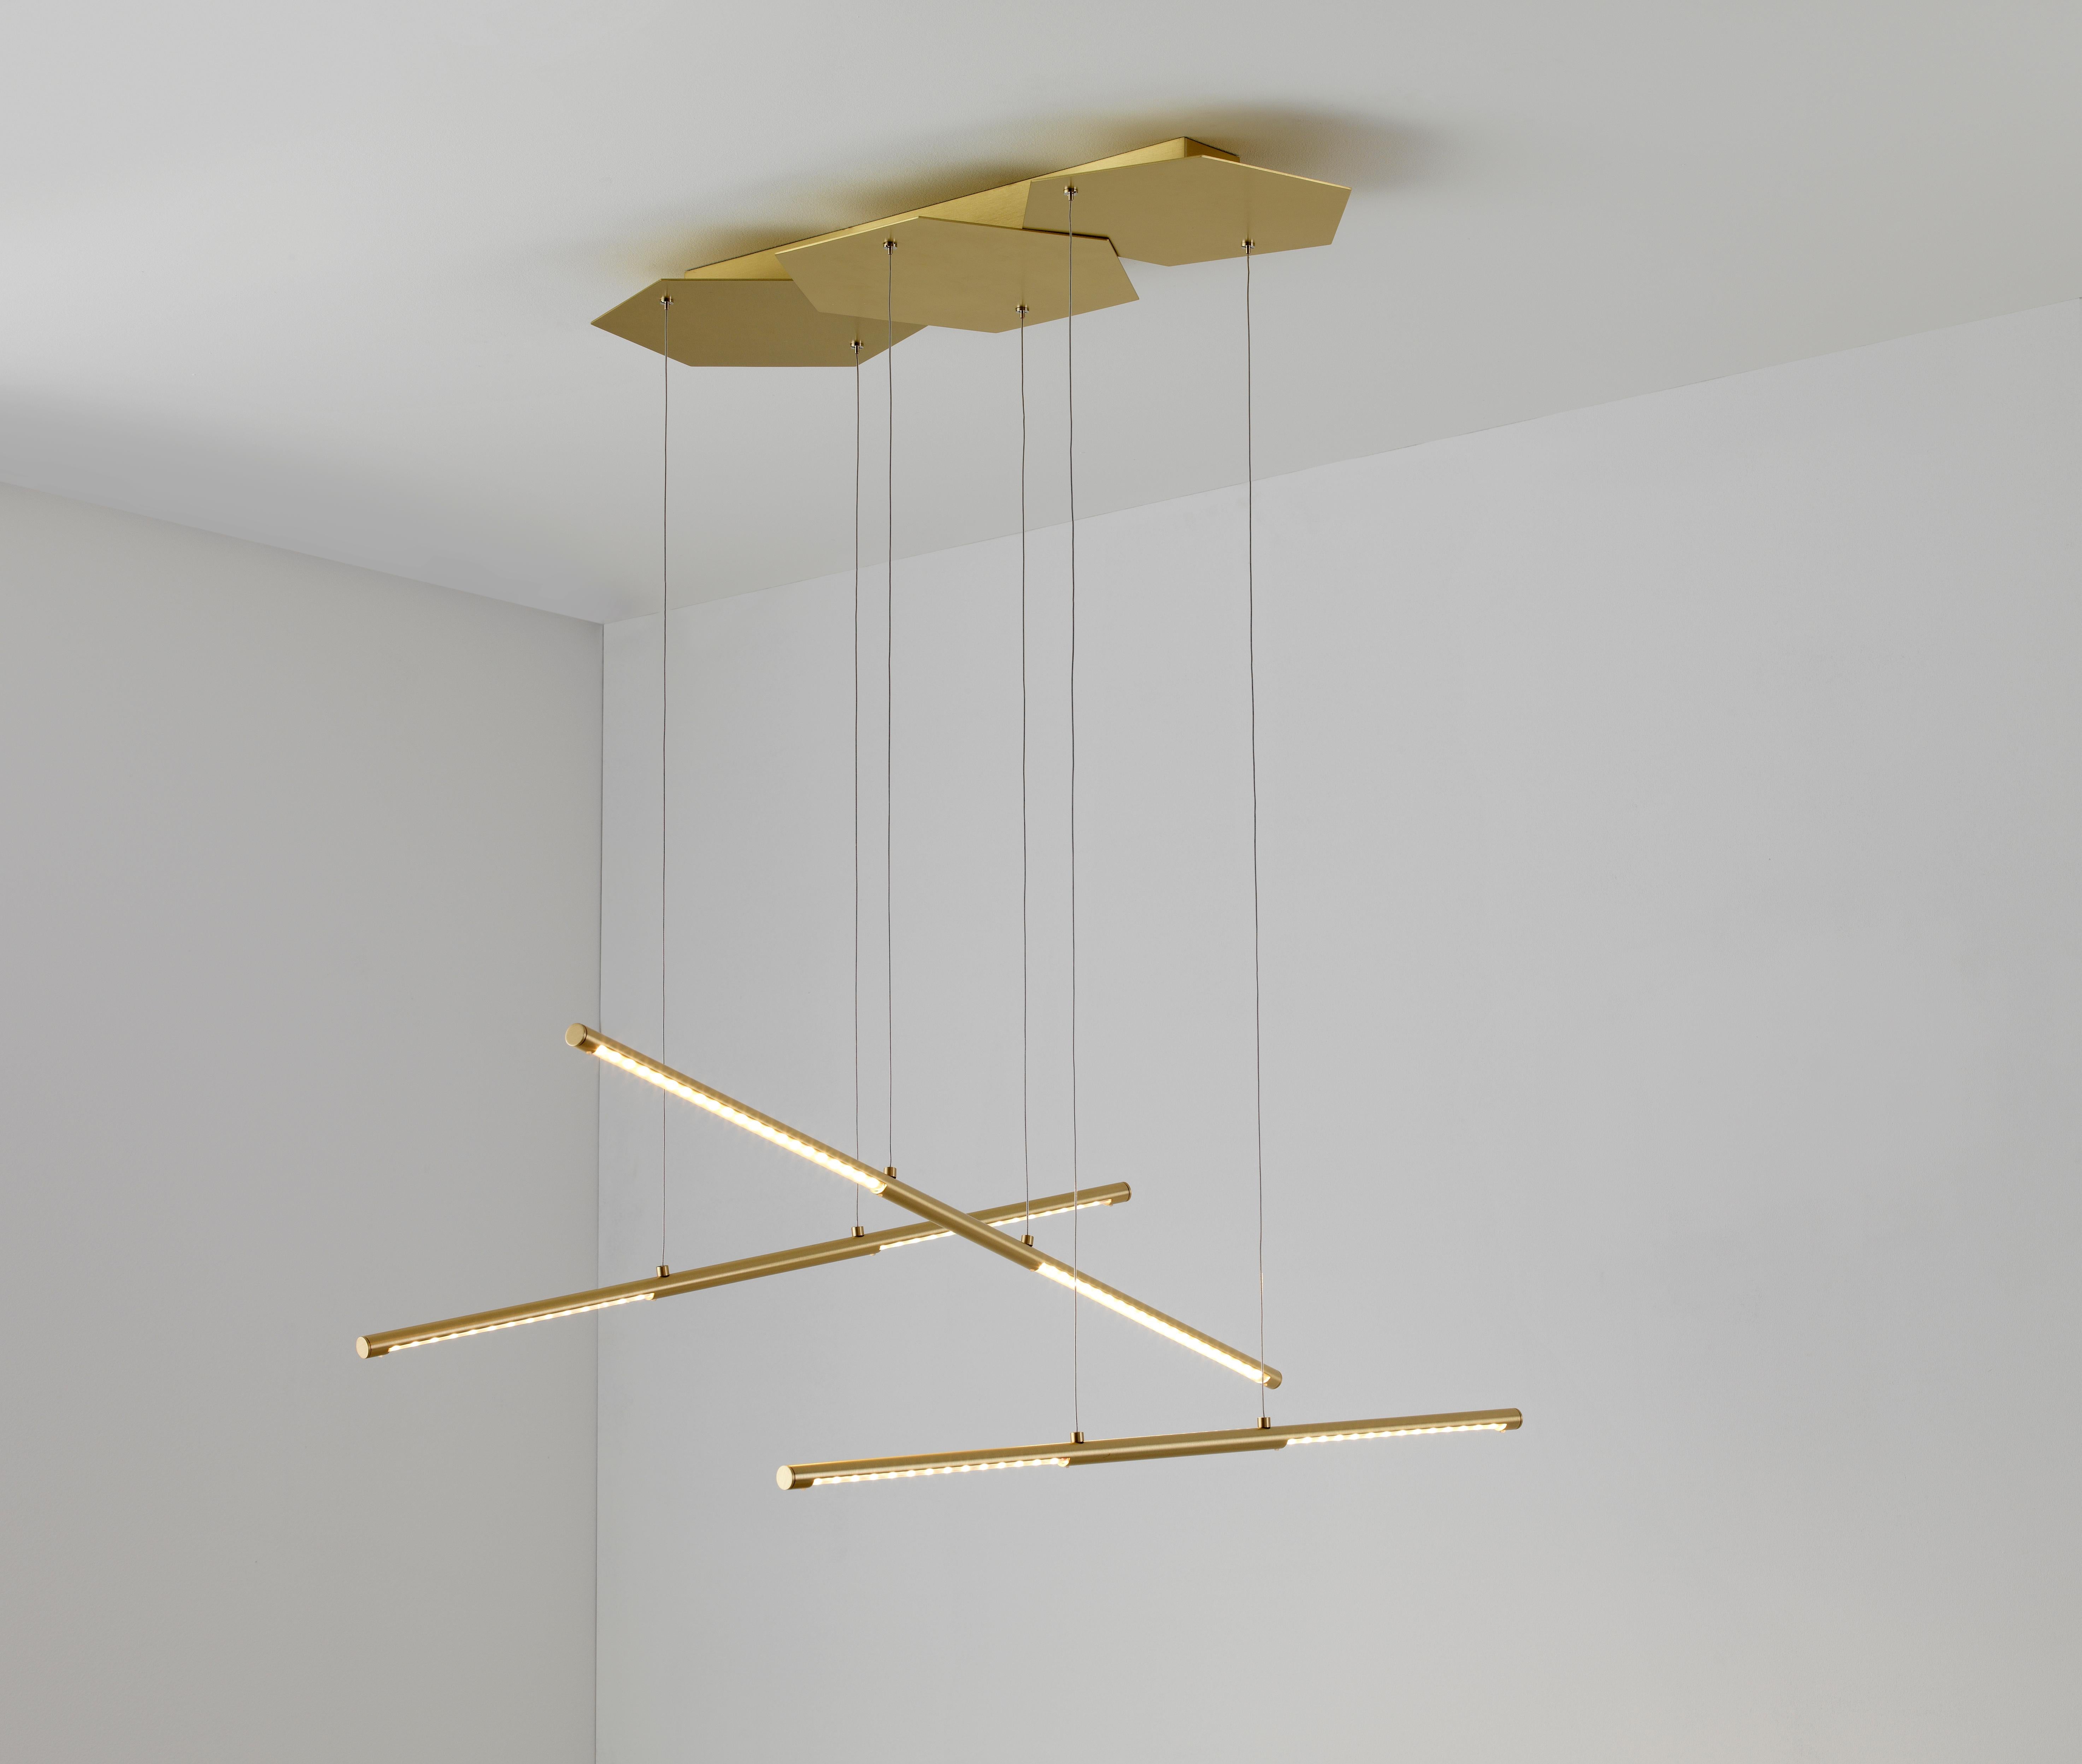 Link pendant by Emilie Cathelineau
Dimensions: D 59 x W 5.5 x H 100 cm
Materials: Solid brass, Satin Polycarbonate diffuser, Black textile cable (2m)
Others finishes and dimensions are available.

All our lamps can be wired according to each